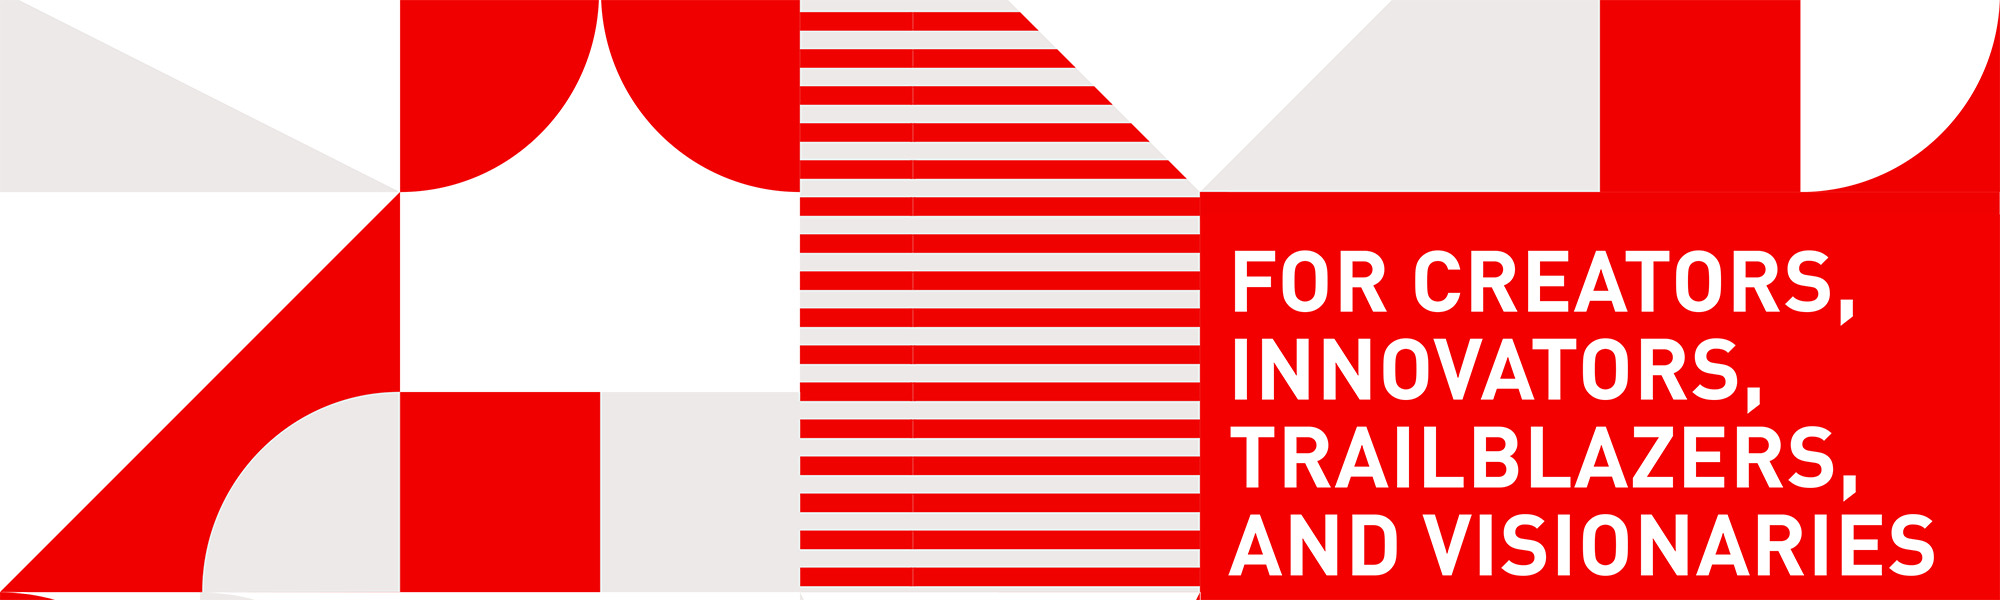 Red and white artistic design for Falling Walls competition 